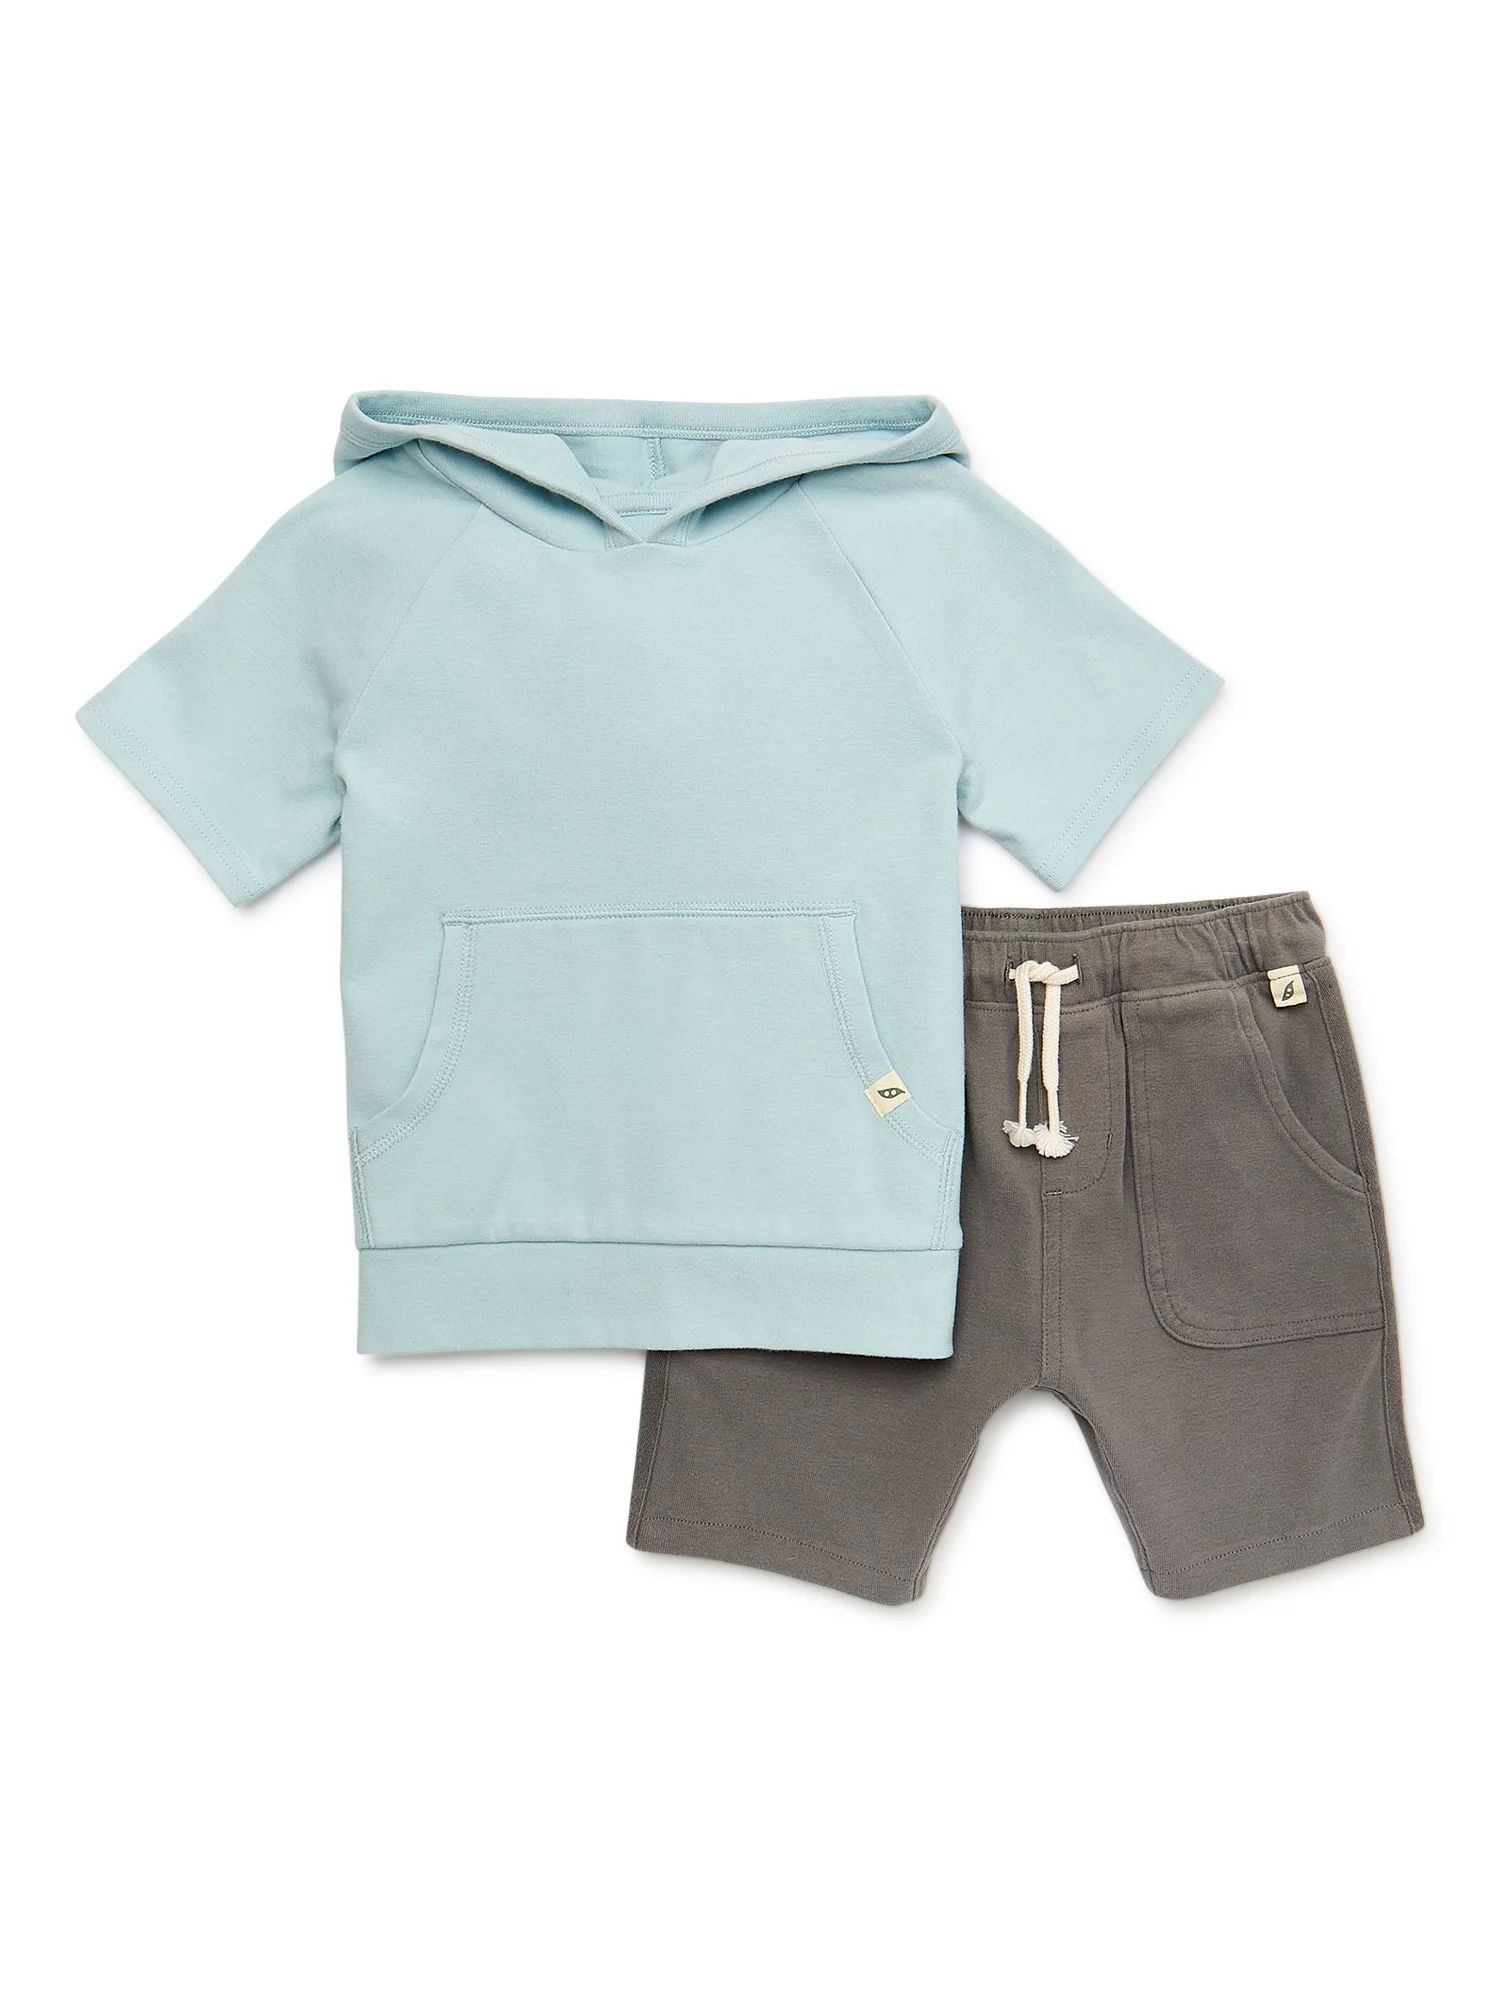 easy-peasy Toddler Boy Short Sleeve Hoodie and Shorts Outfit Set, 2-Piece, Sizes 12M-5T | Walmart (US)